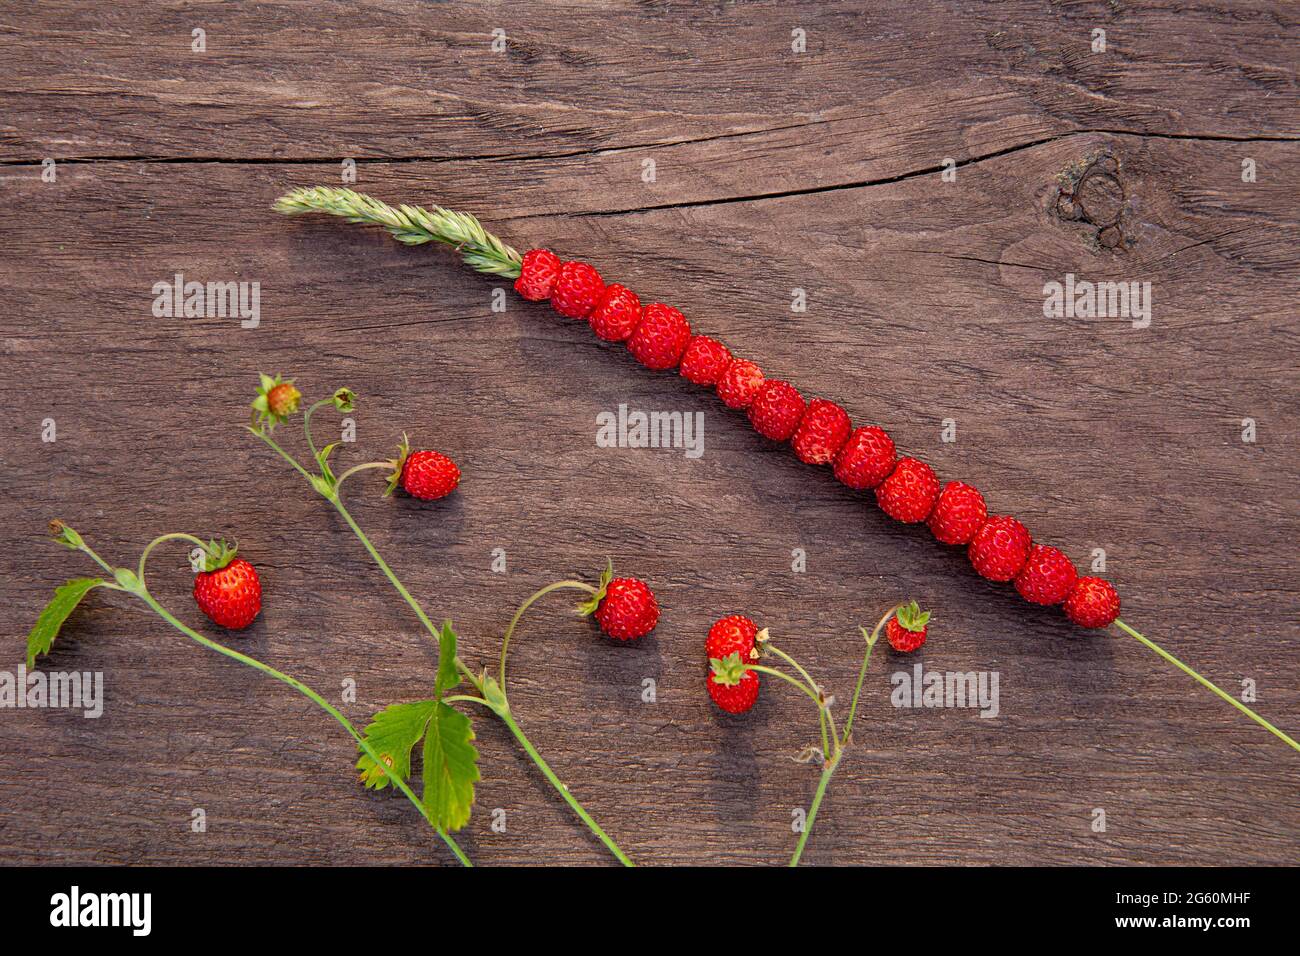 Fragaria vesca also known as wild strawberry, woodland strawberry, berry that grows on wild meadows and forests. Wild strawberries stacked on plant st Stock Photo